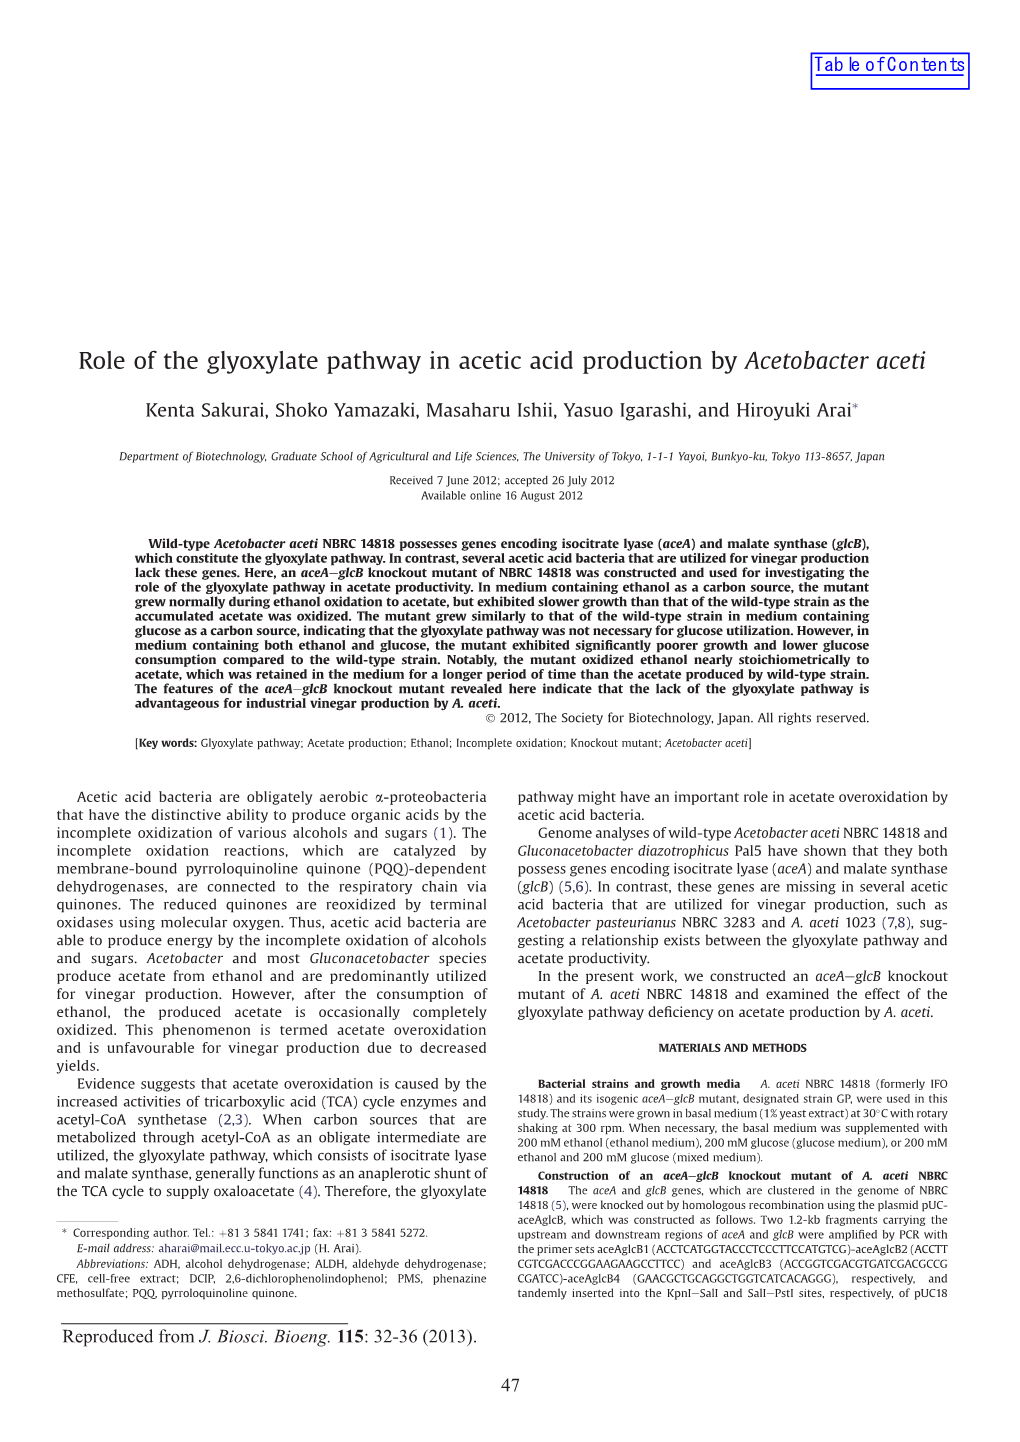 Role of the Glyoxylate Pathway in Acetic Acid Production by Acetobacter Aceti